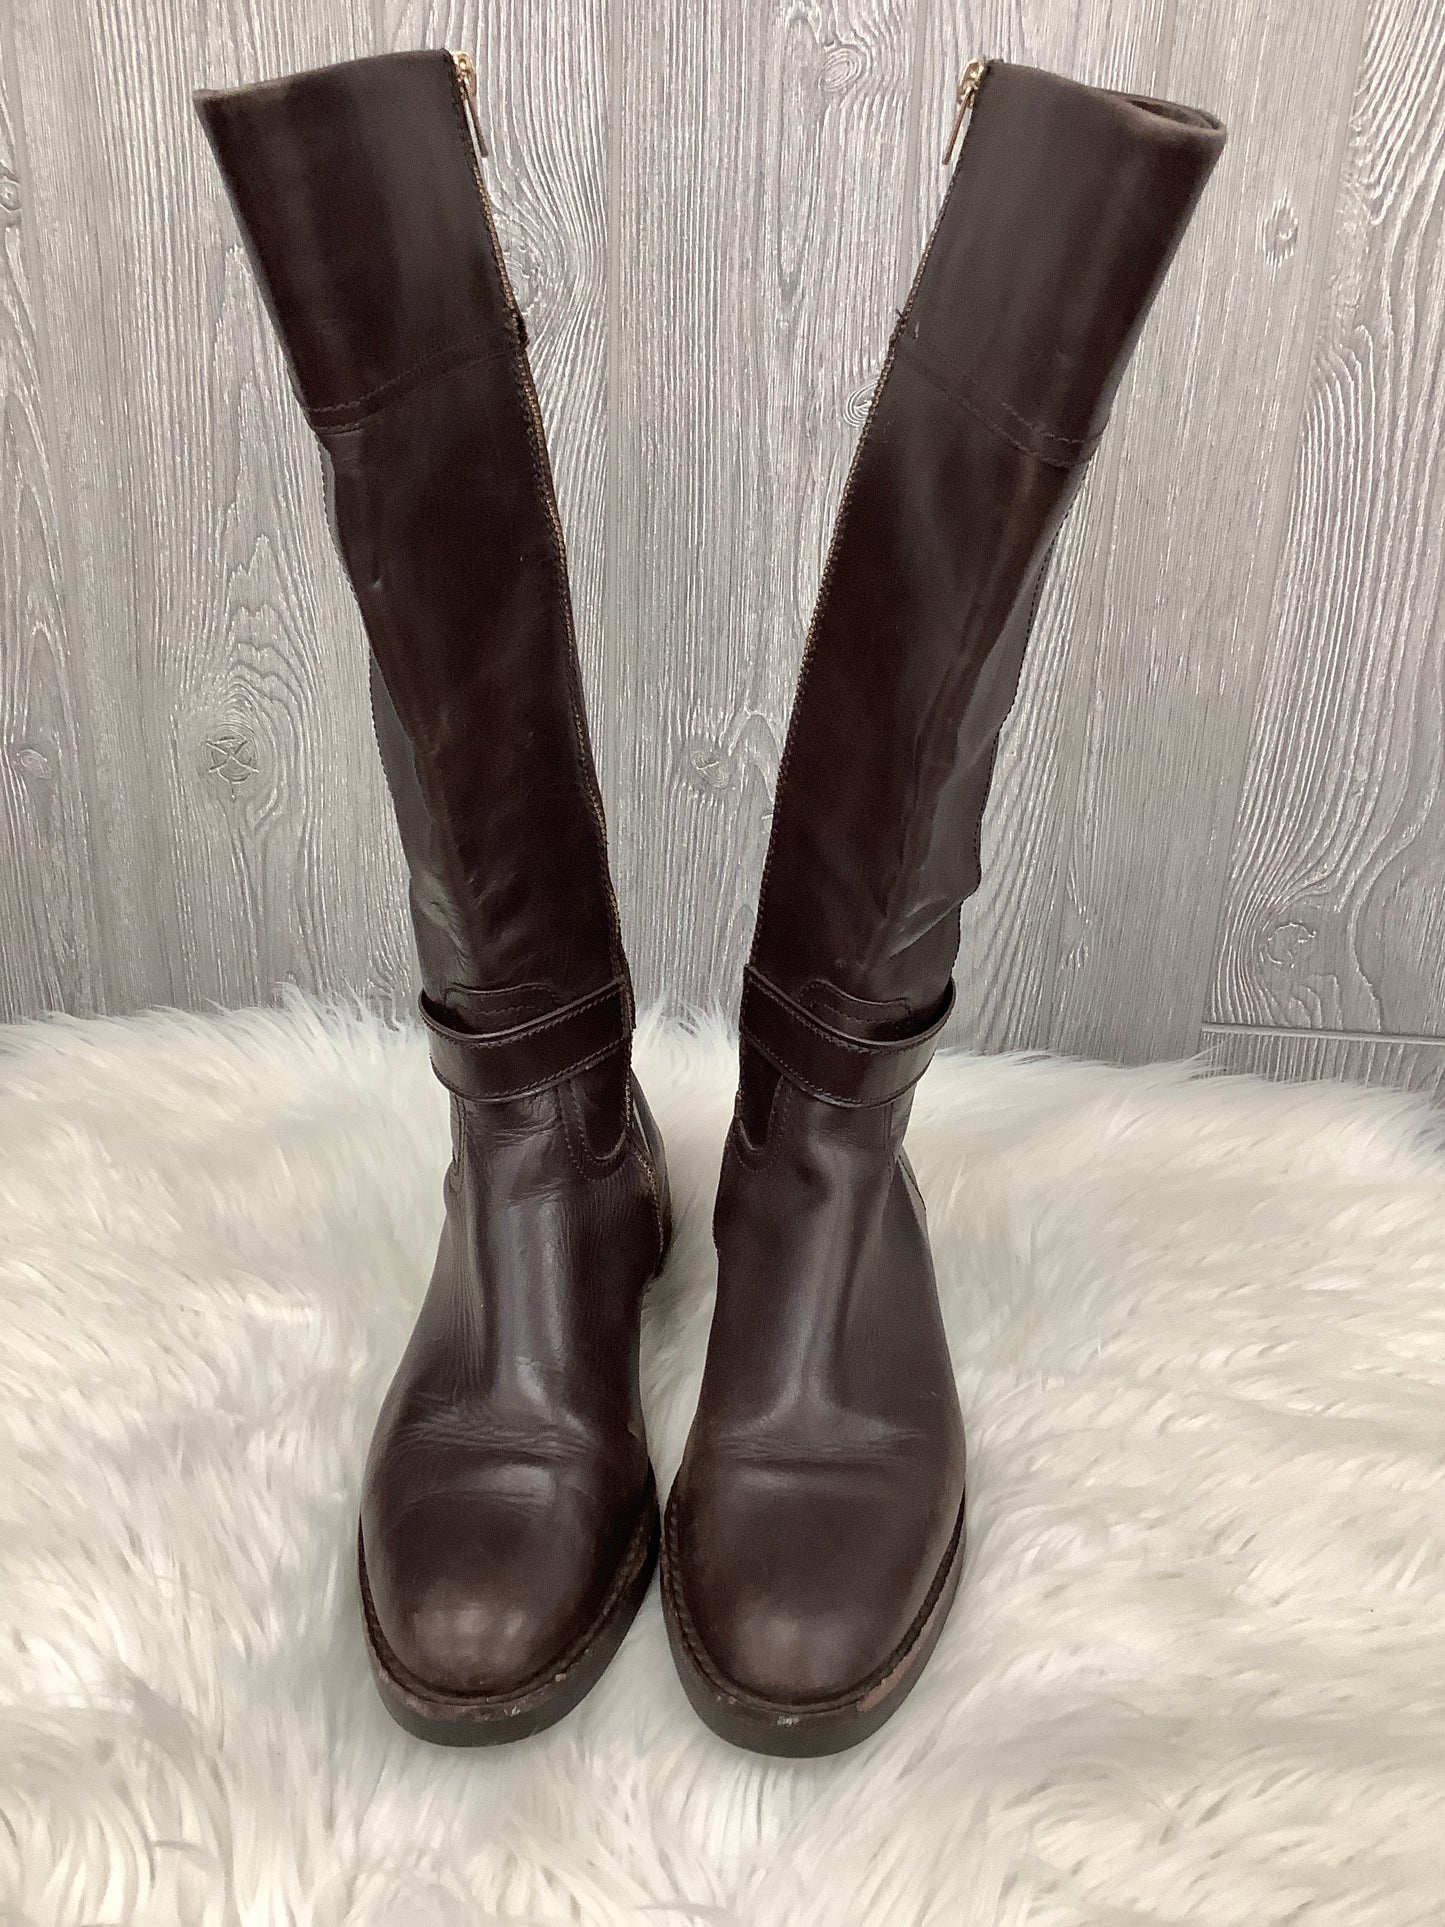 Boots Designer By Coach  Size: 10